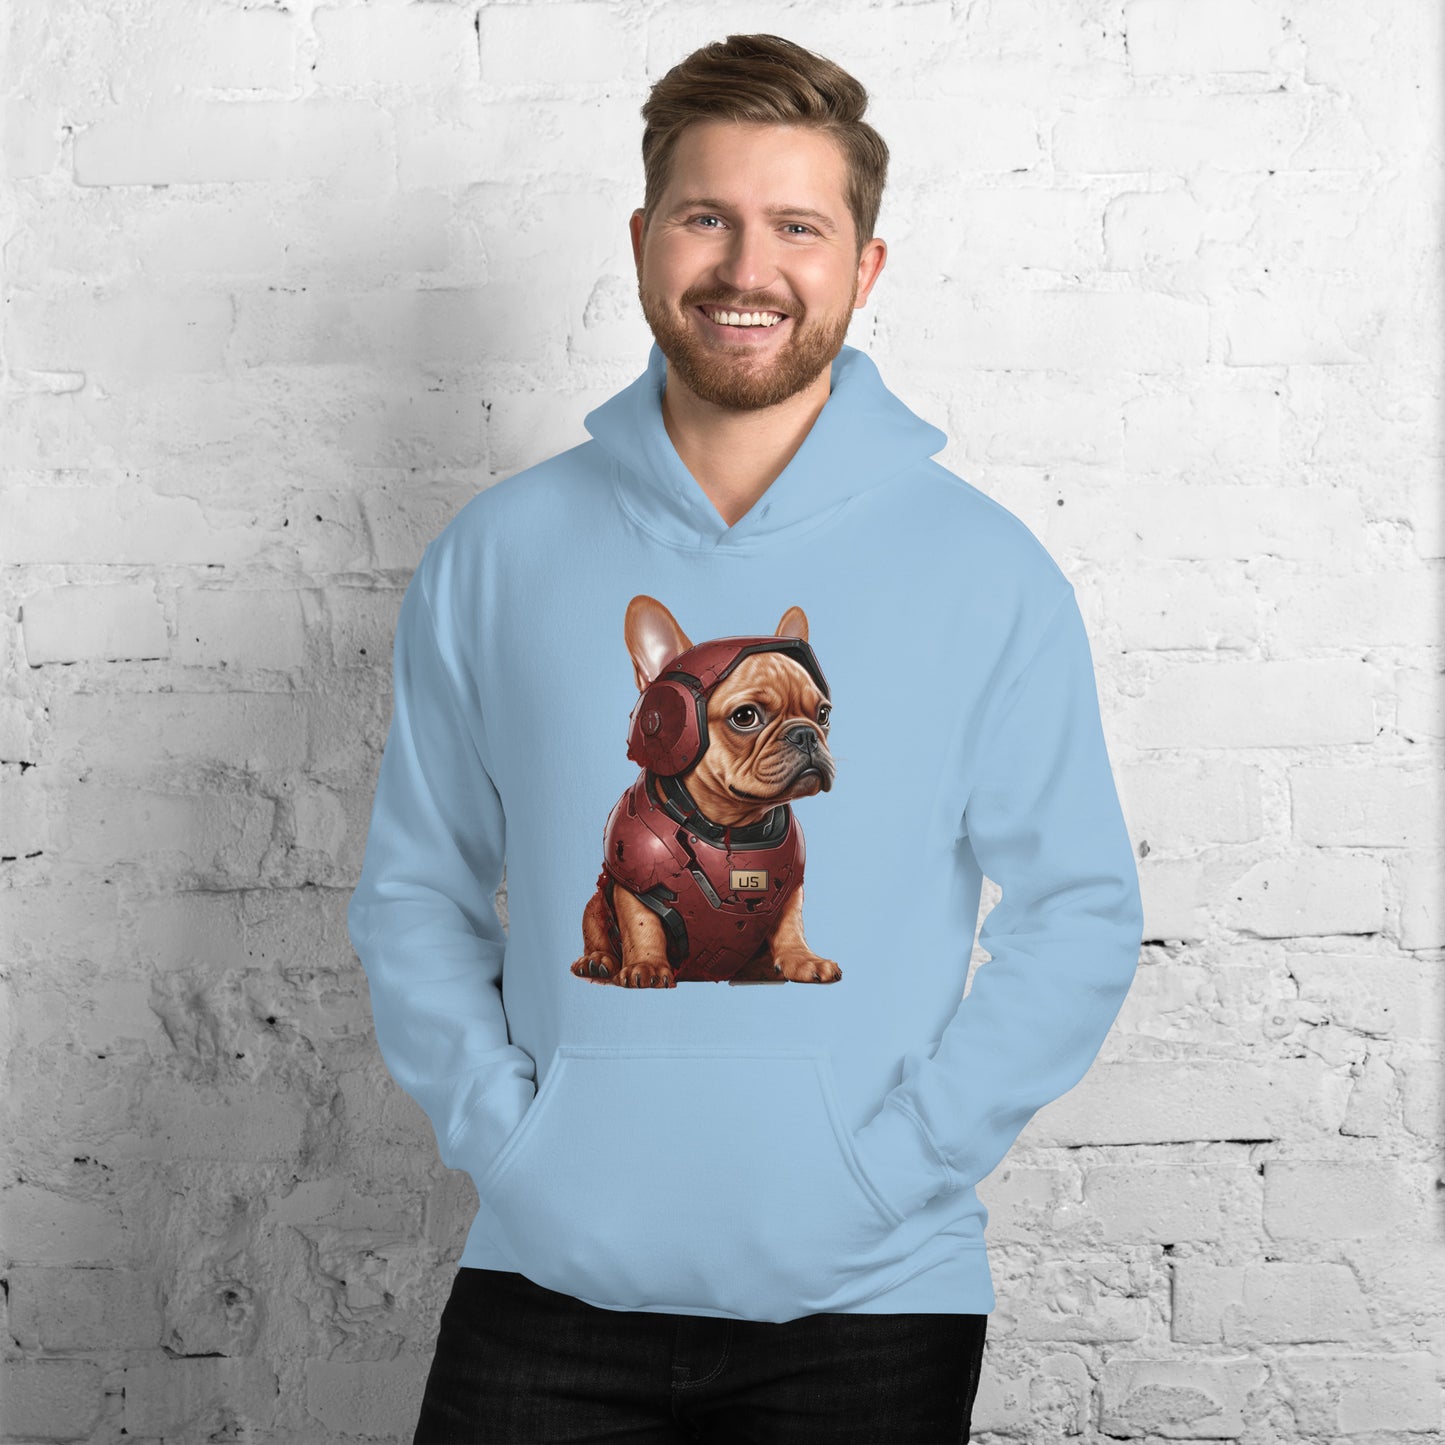 Frenchie Fanfare Unisex Hoodie: For the Ultimate Dog Lover